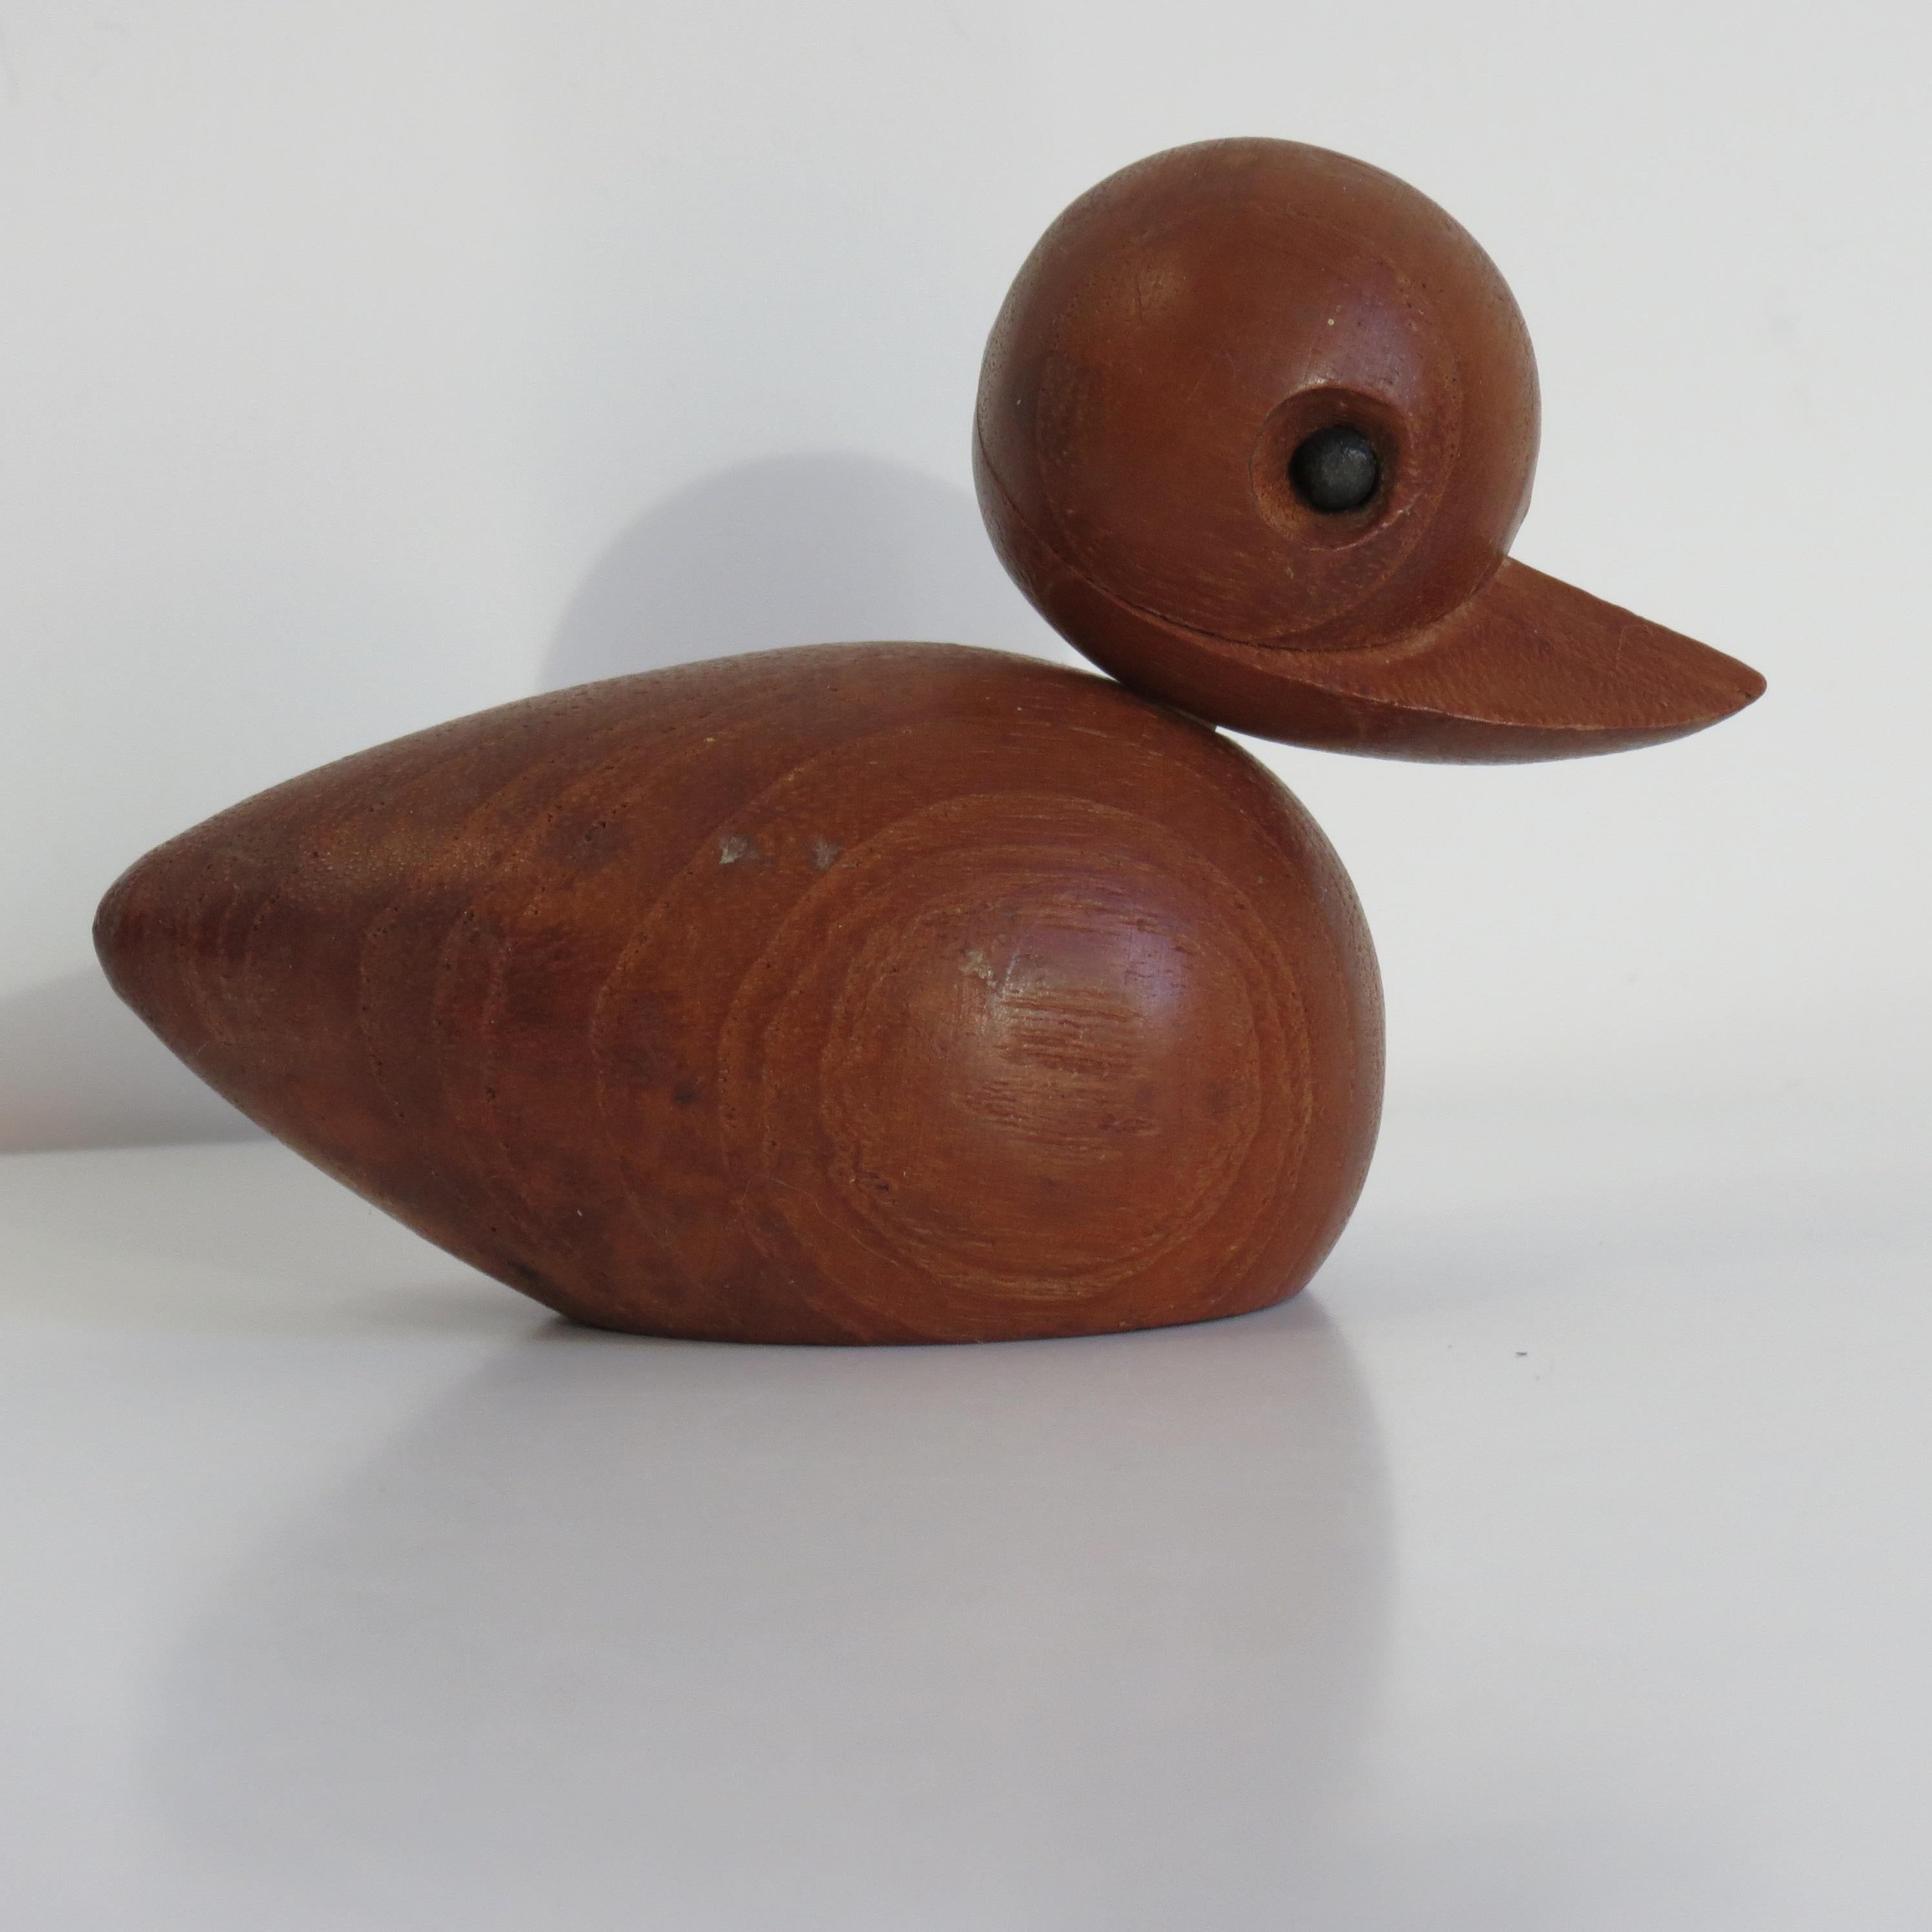 A vintage wooden duck produced by Empire, similar in style to Hans Bollinger ducks. 

Solid teak, in good vintage some condition, general signs of wear. The ducks head can be turned to various different positions.

Stamped to underside Empire